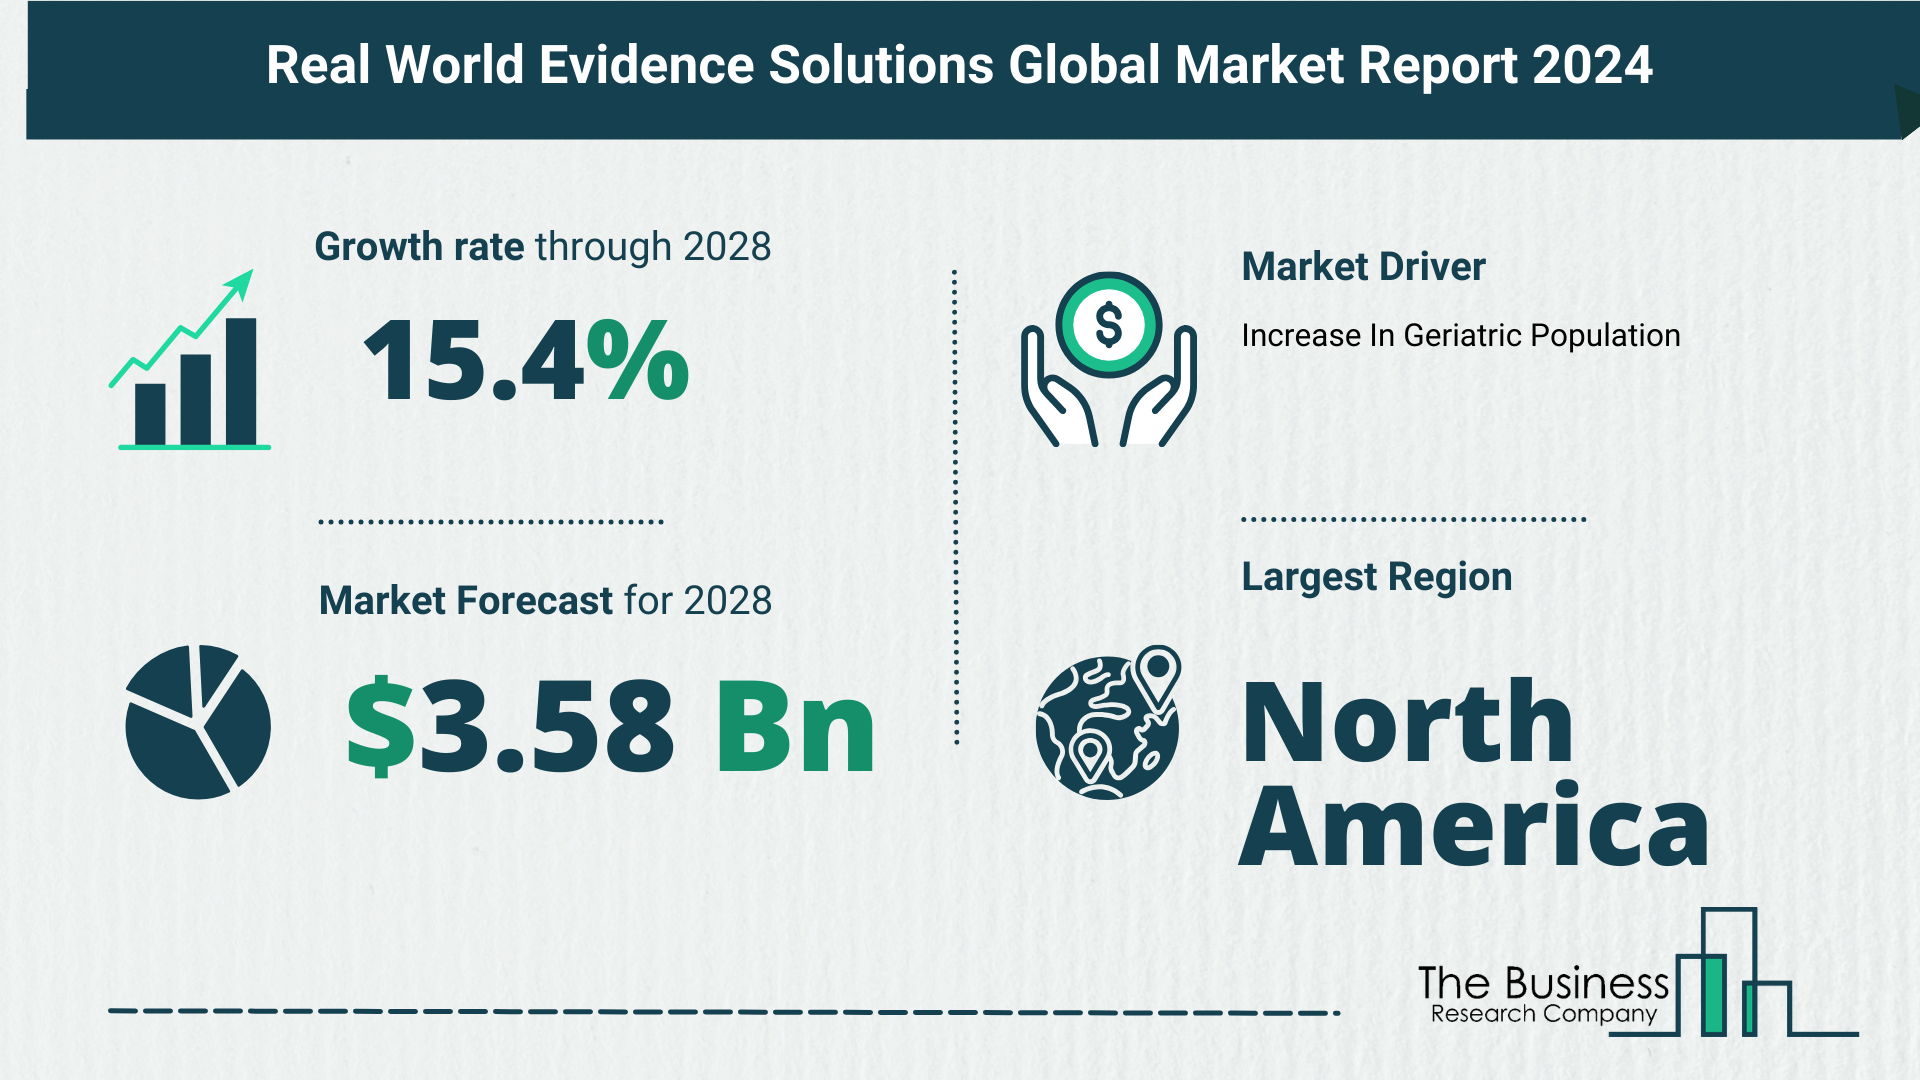 What Is The Forecast Growth Rate For The Real World Evidence Solutions Market?